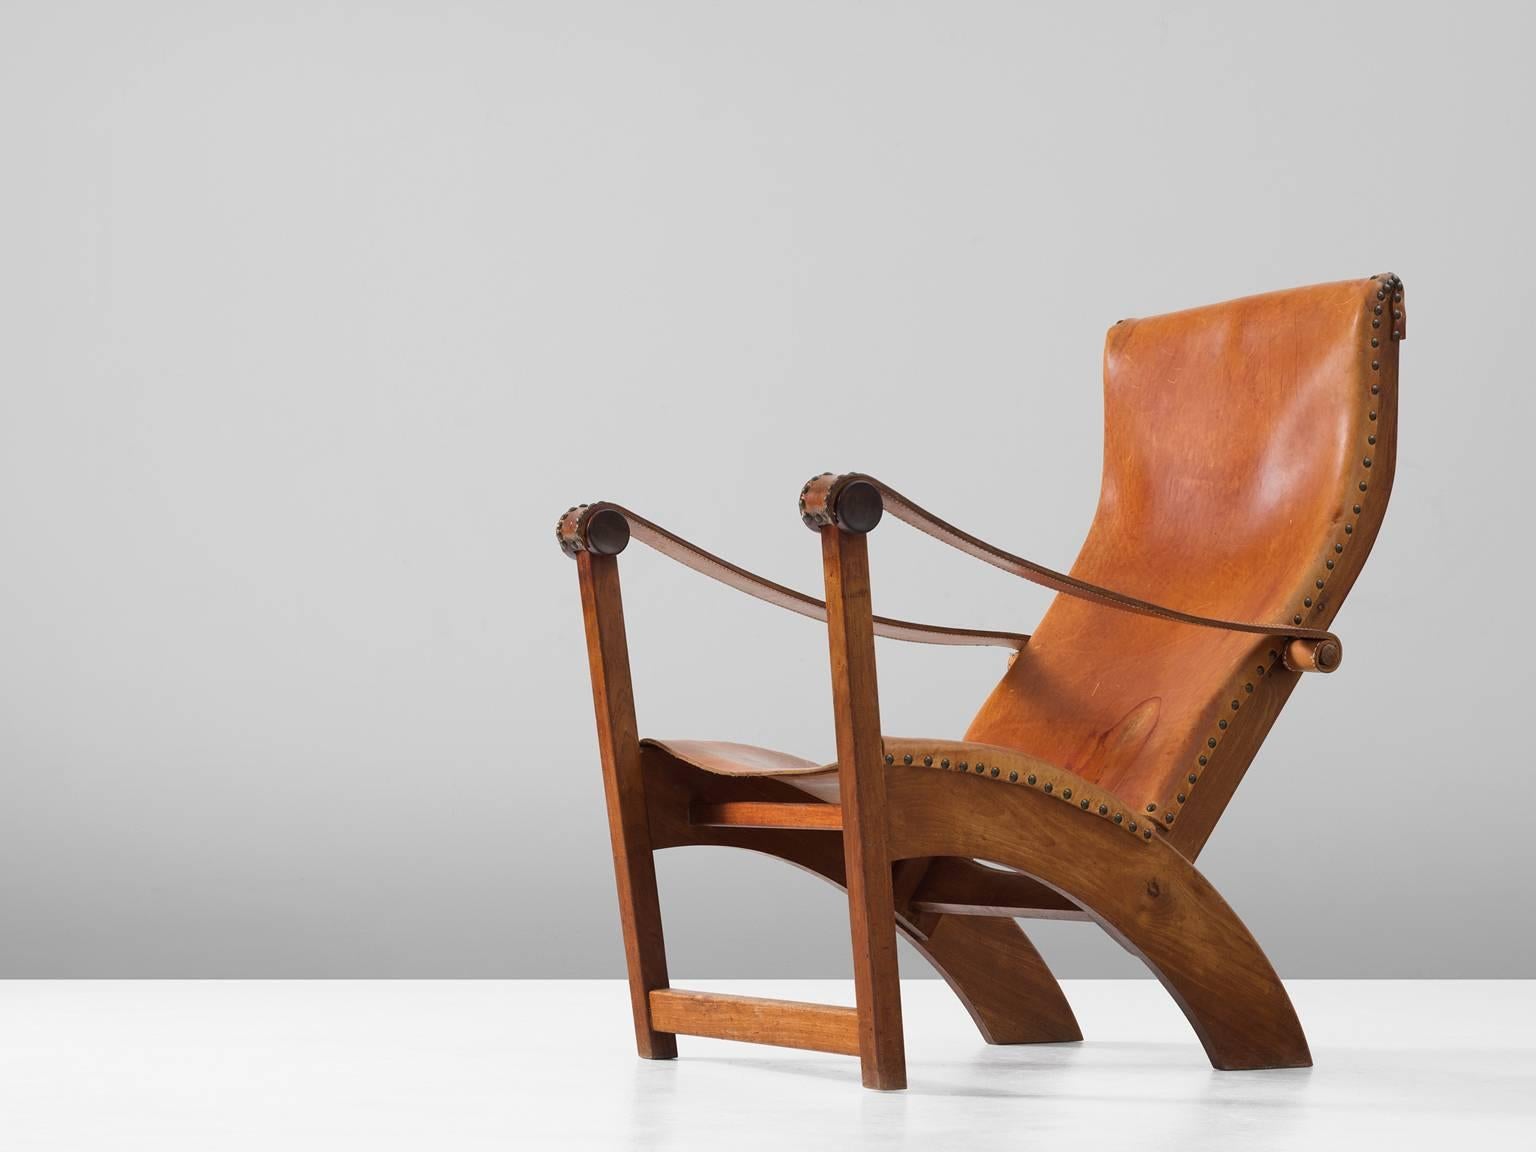 Lounge chair model 'Københavnerstolen', in mahogany and leather, by Mogens Voltelen for Niels Vodder, Denmark, 1936. 

Stunning Copenhagen chair by Mogens Voltelen. This chair shows beautiful lines as seen on the arched legs on the back of the